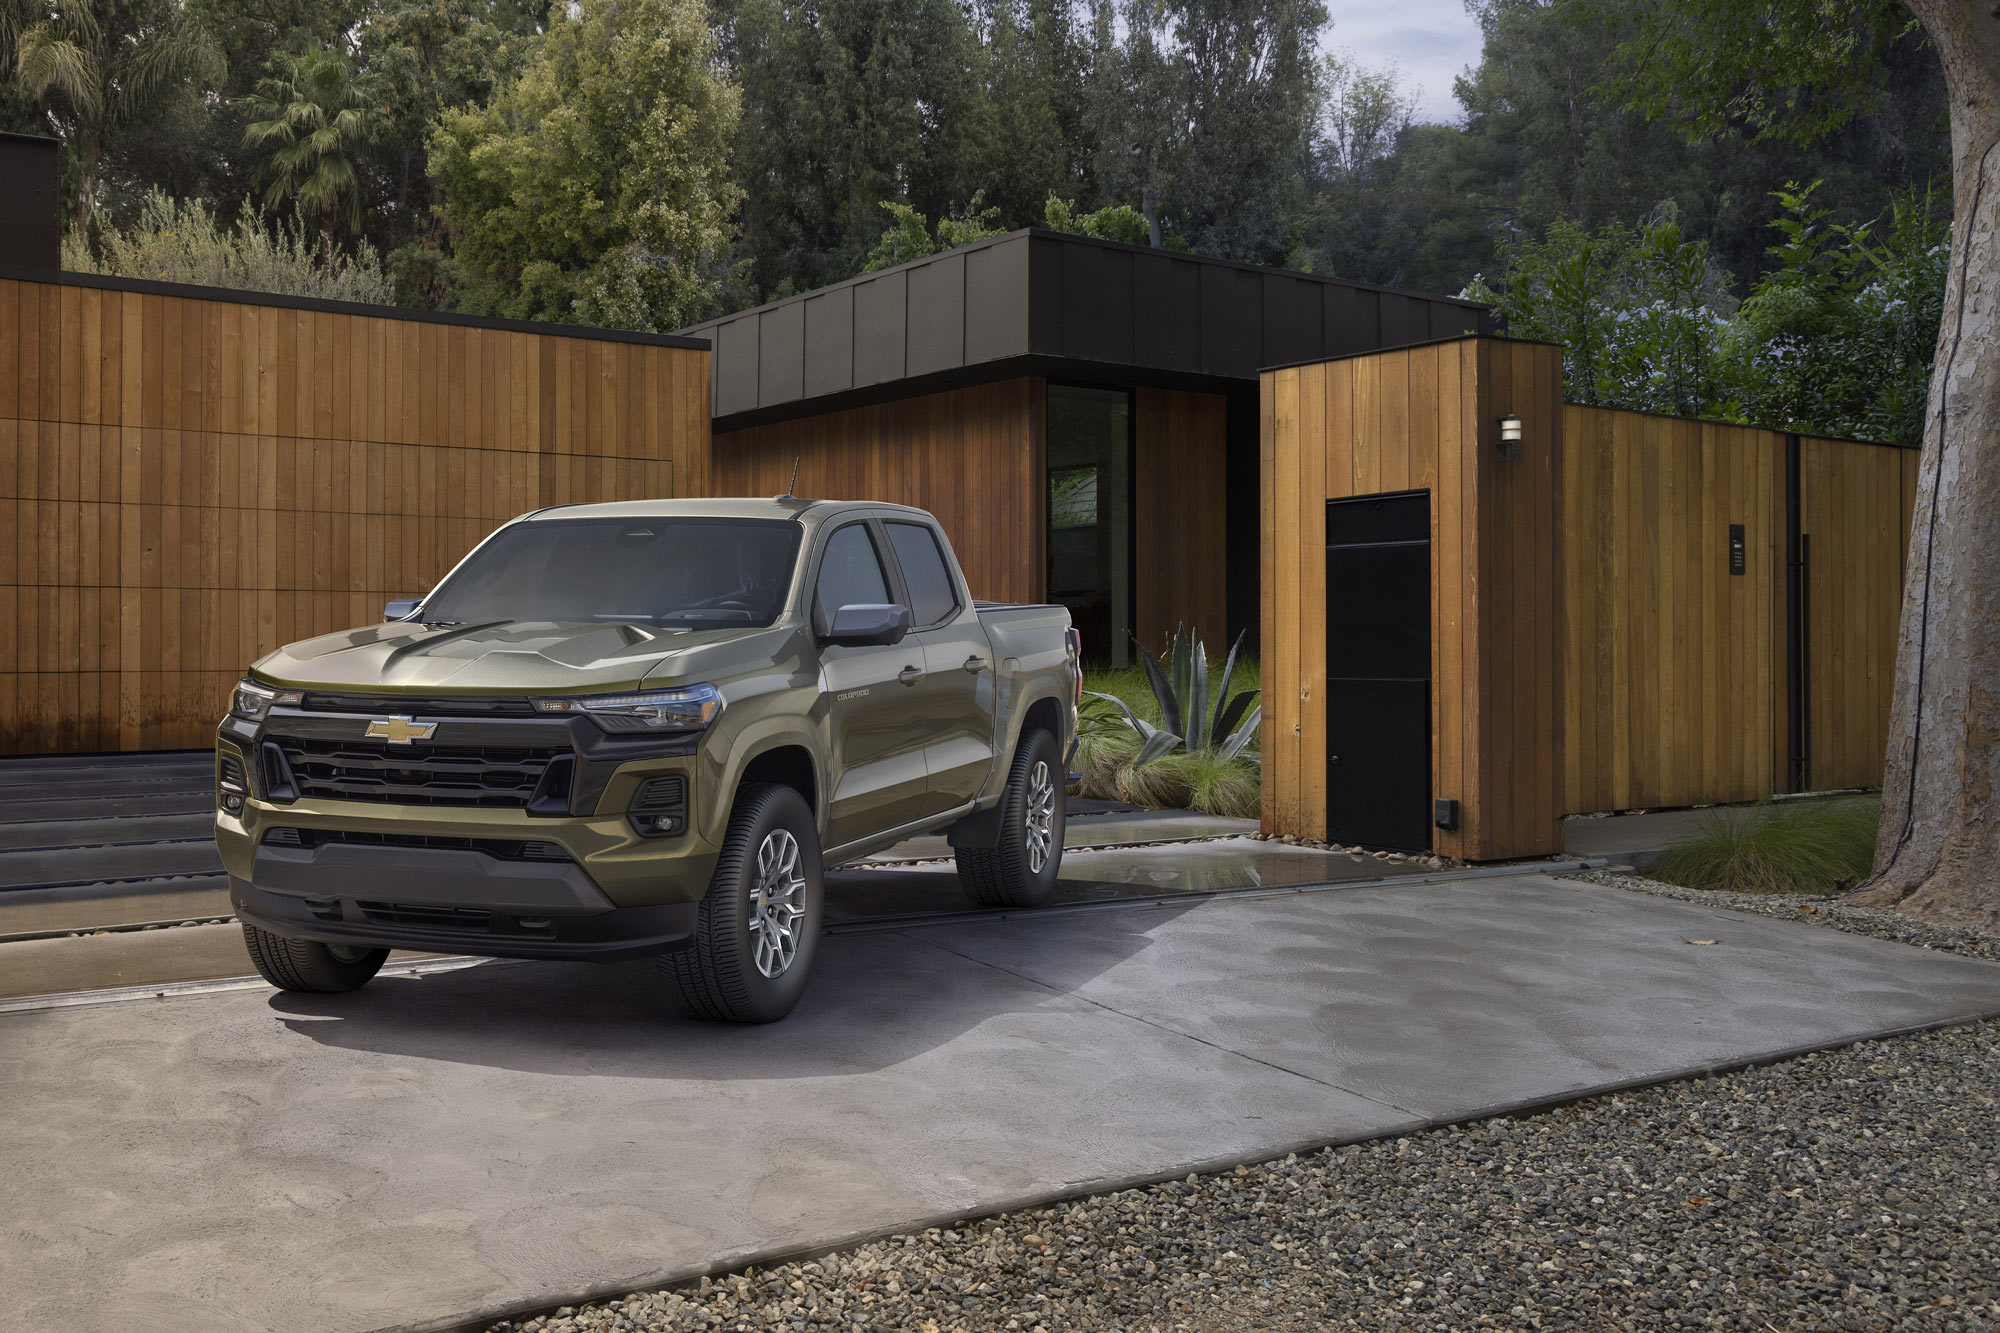 Green 2023 Chevrolet Colorado LT parked outside wooden house